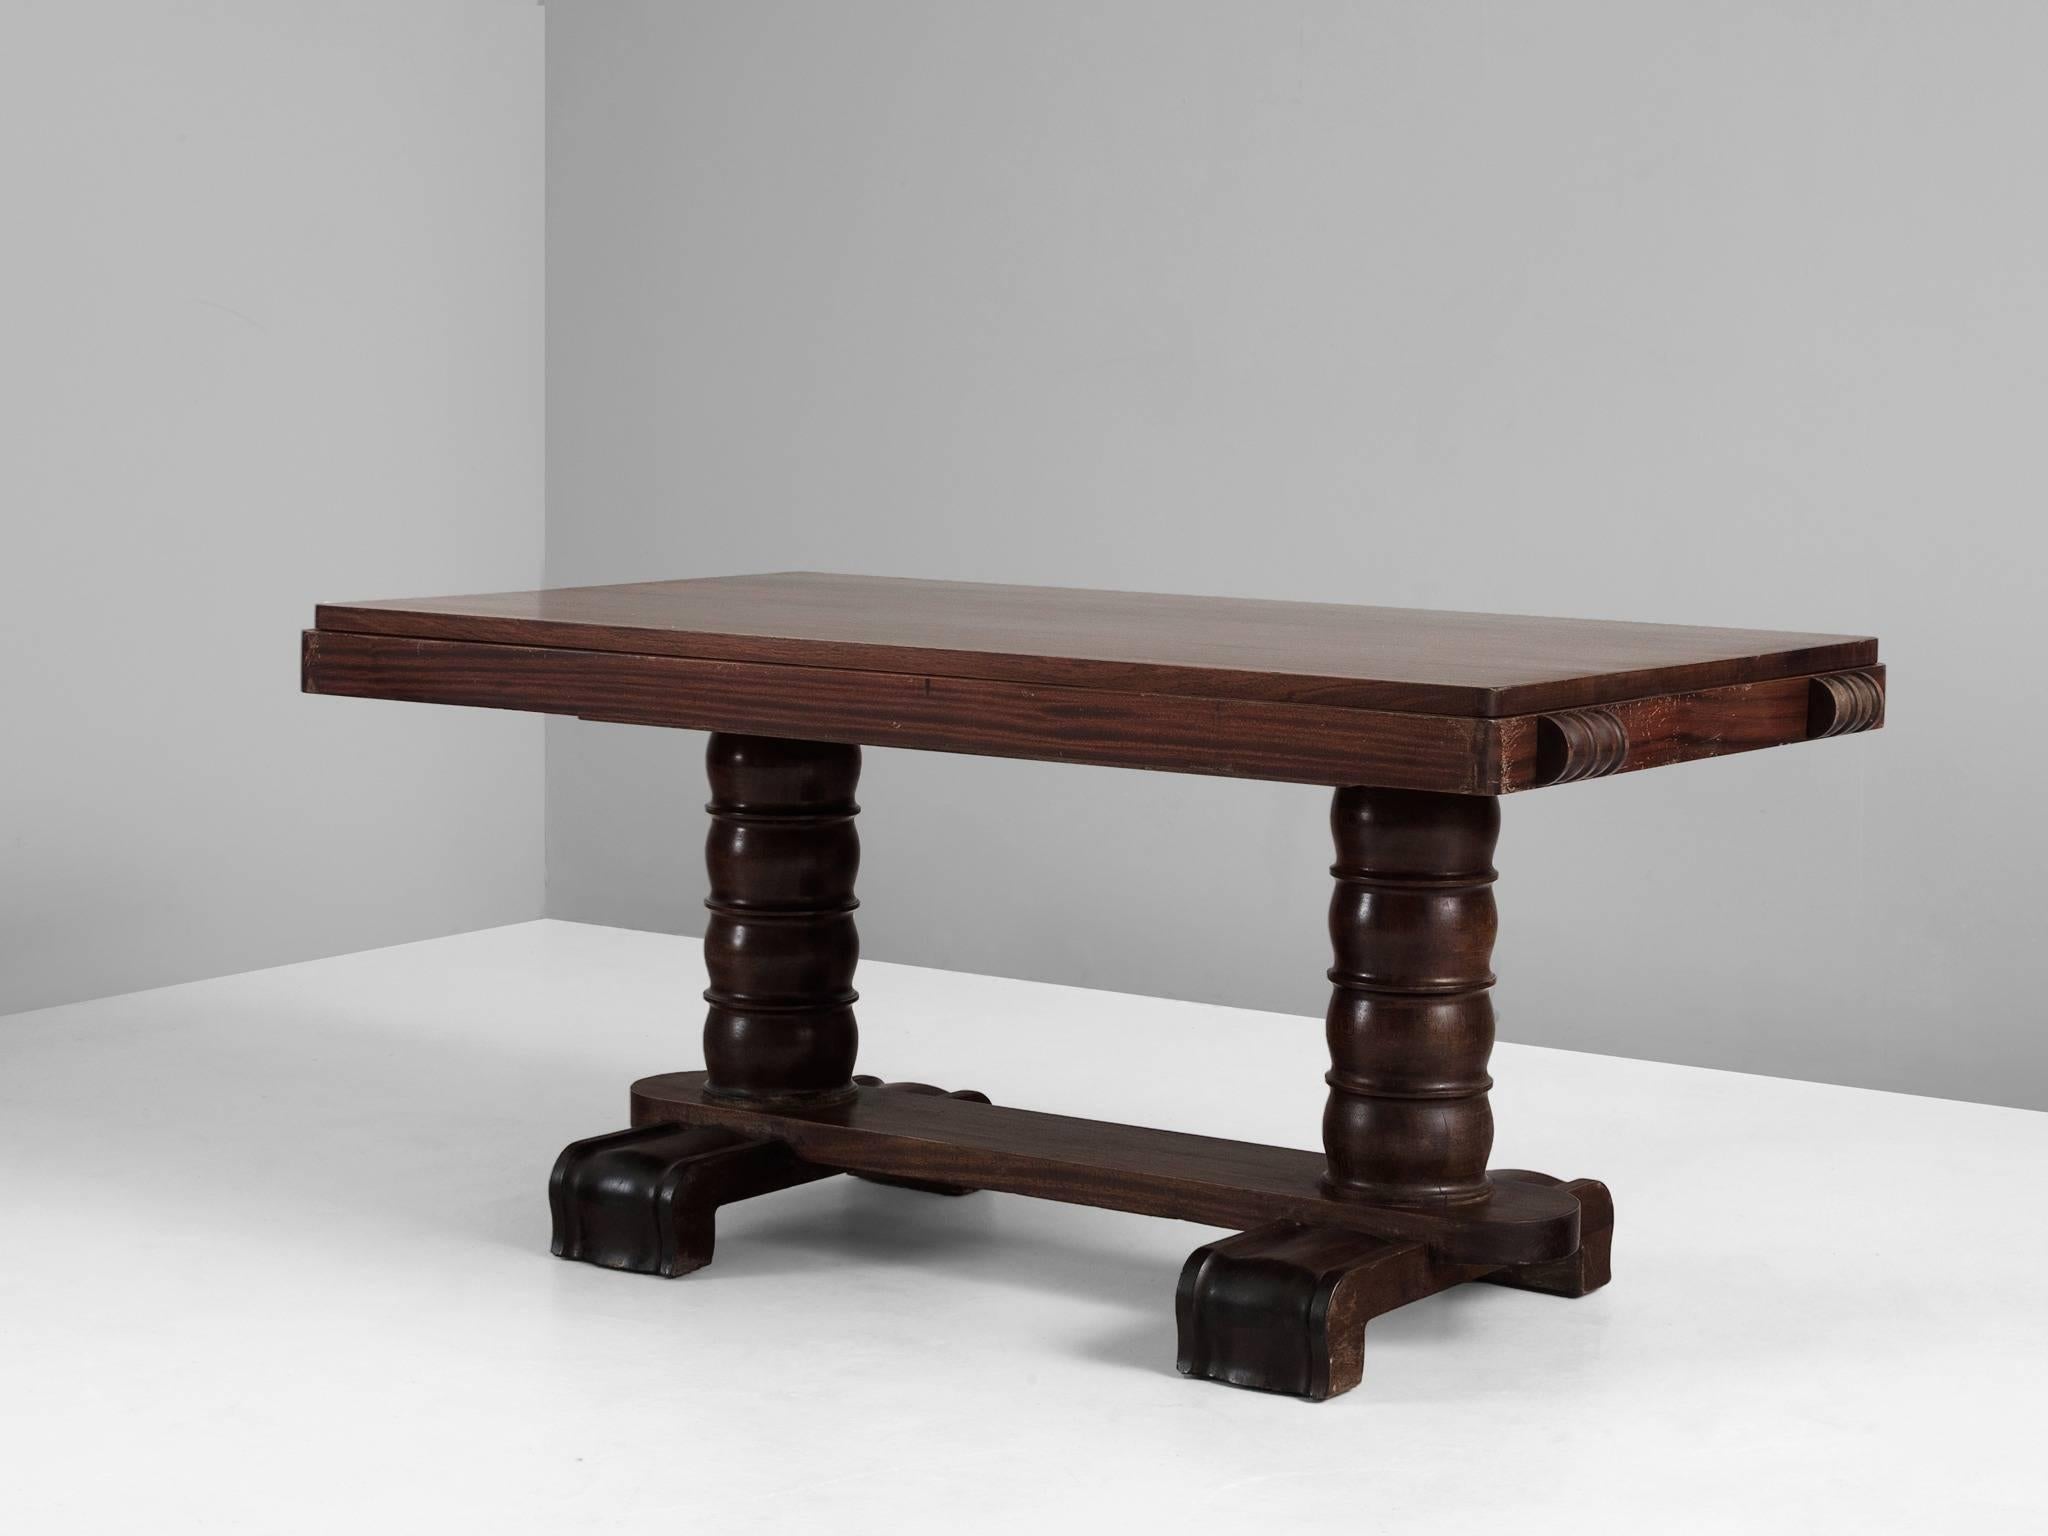 Dining table, in mahogany by Gaston Poisson, France, 1940s. 

Majestic center table in dark brown mahogany. This Art-Deco table shows the great craftsmanship of Gaston Poisson. The base and legs are beautifully detailed with carving and woodwork.